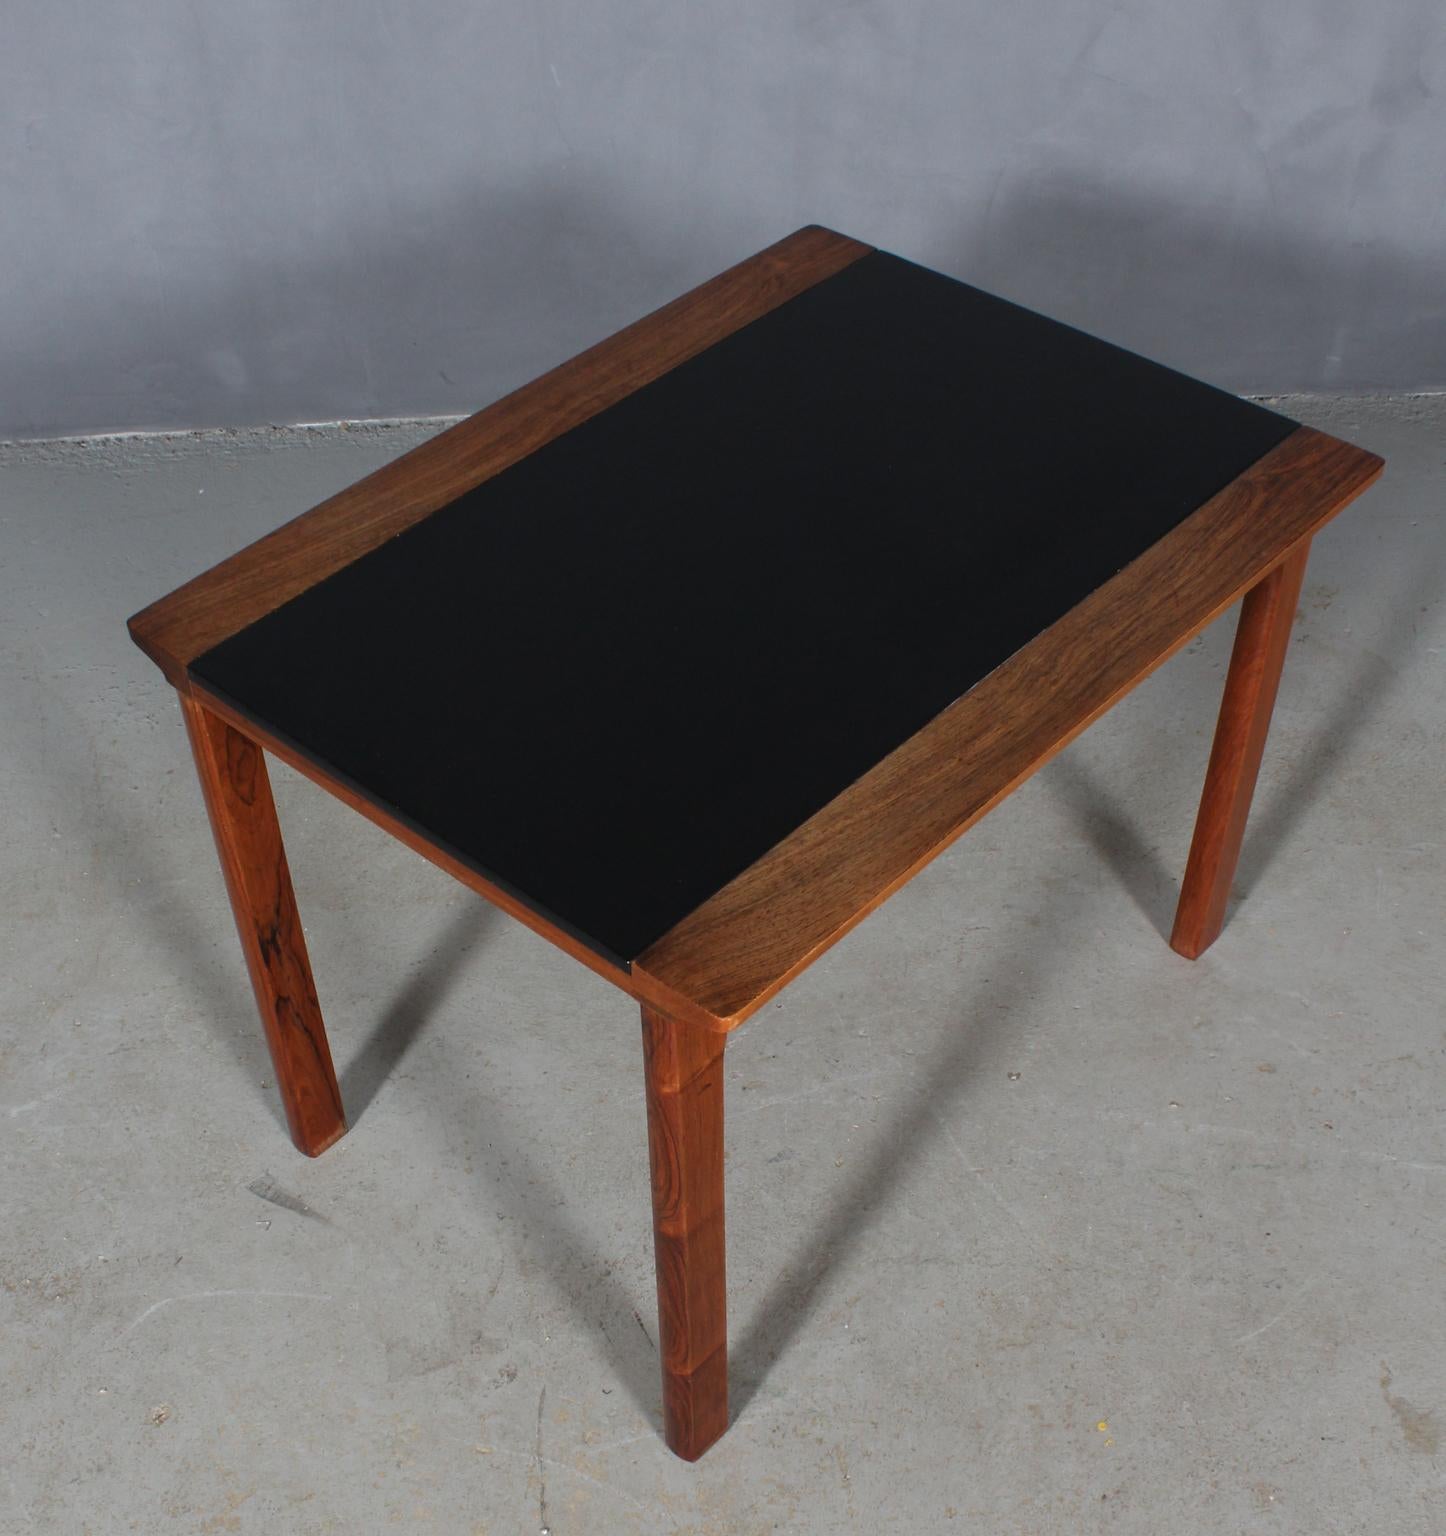 Hans Olsen coffee table / side table of rosewood and leather.